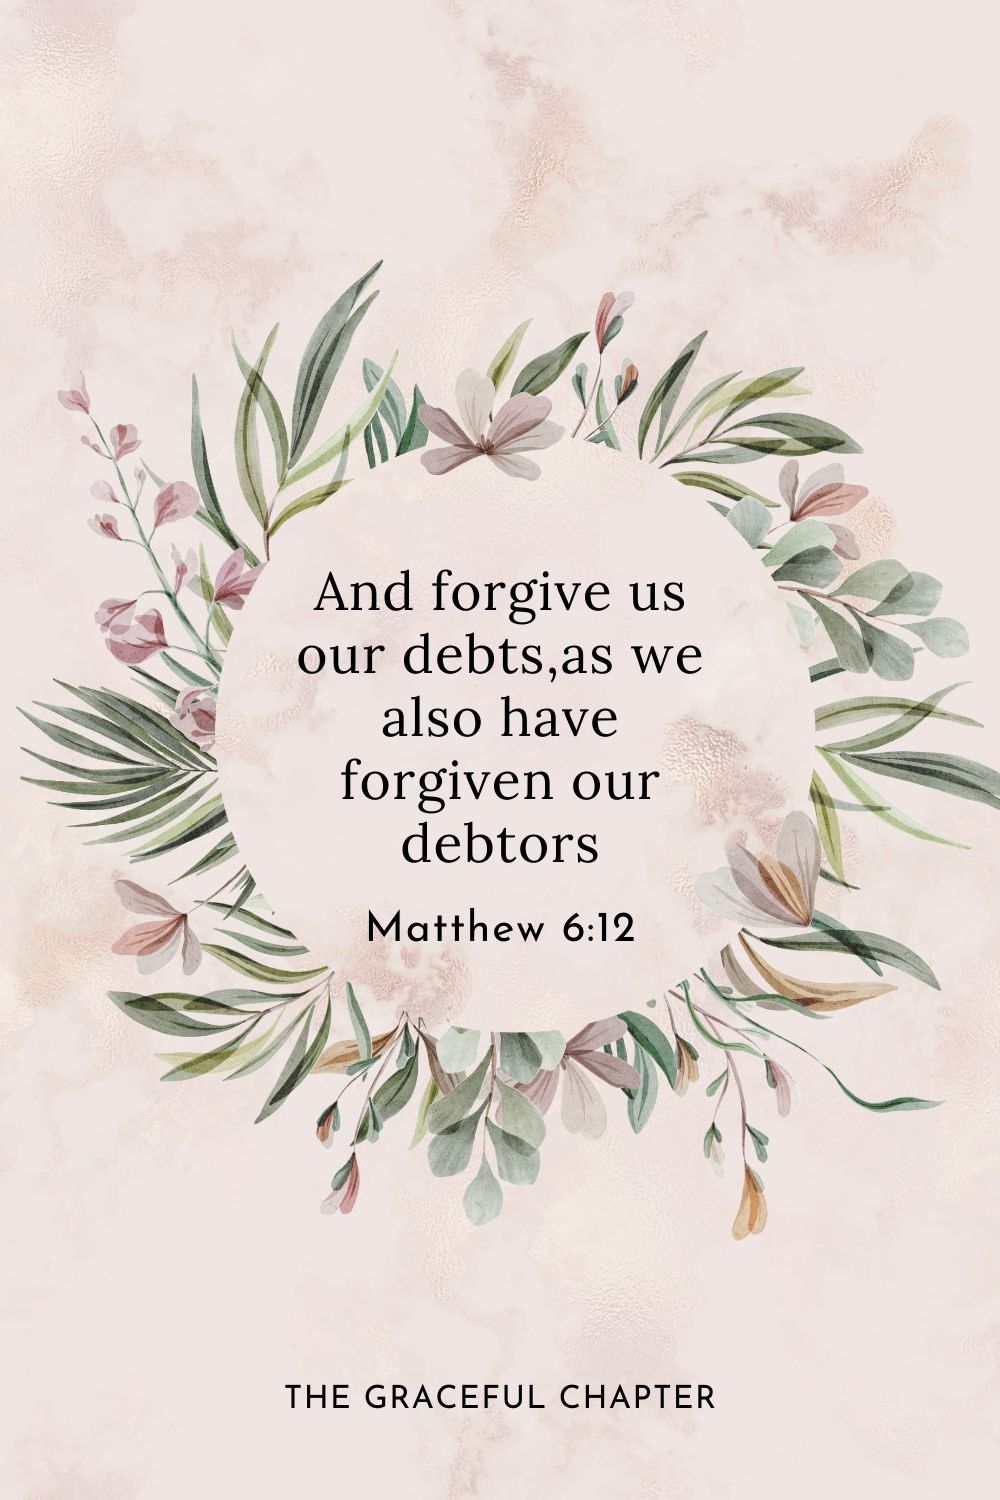 And forgive us our debts, as we also have forgiven our debtors Matthew 6:12